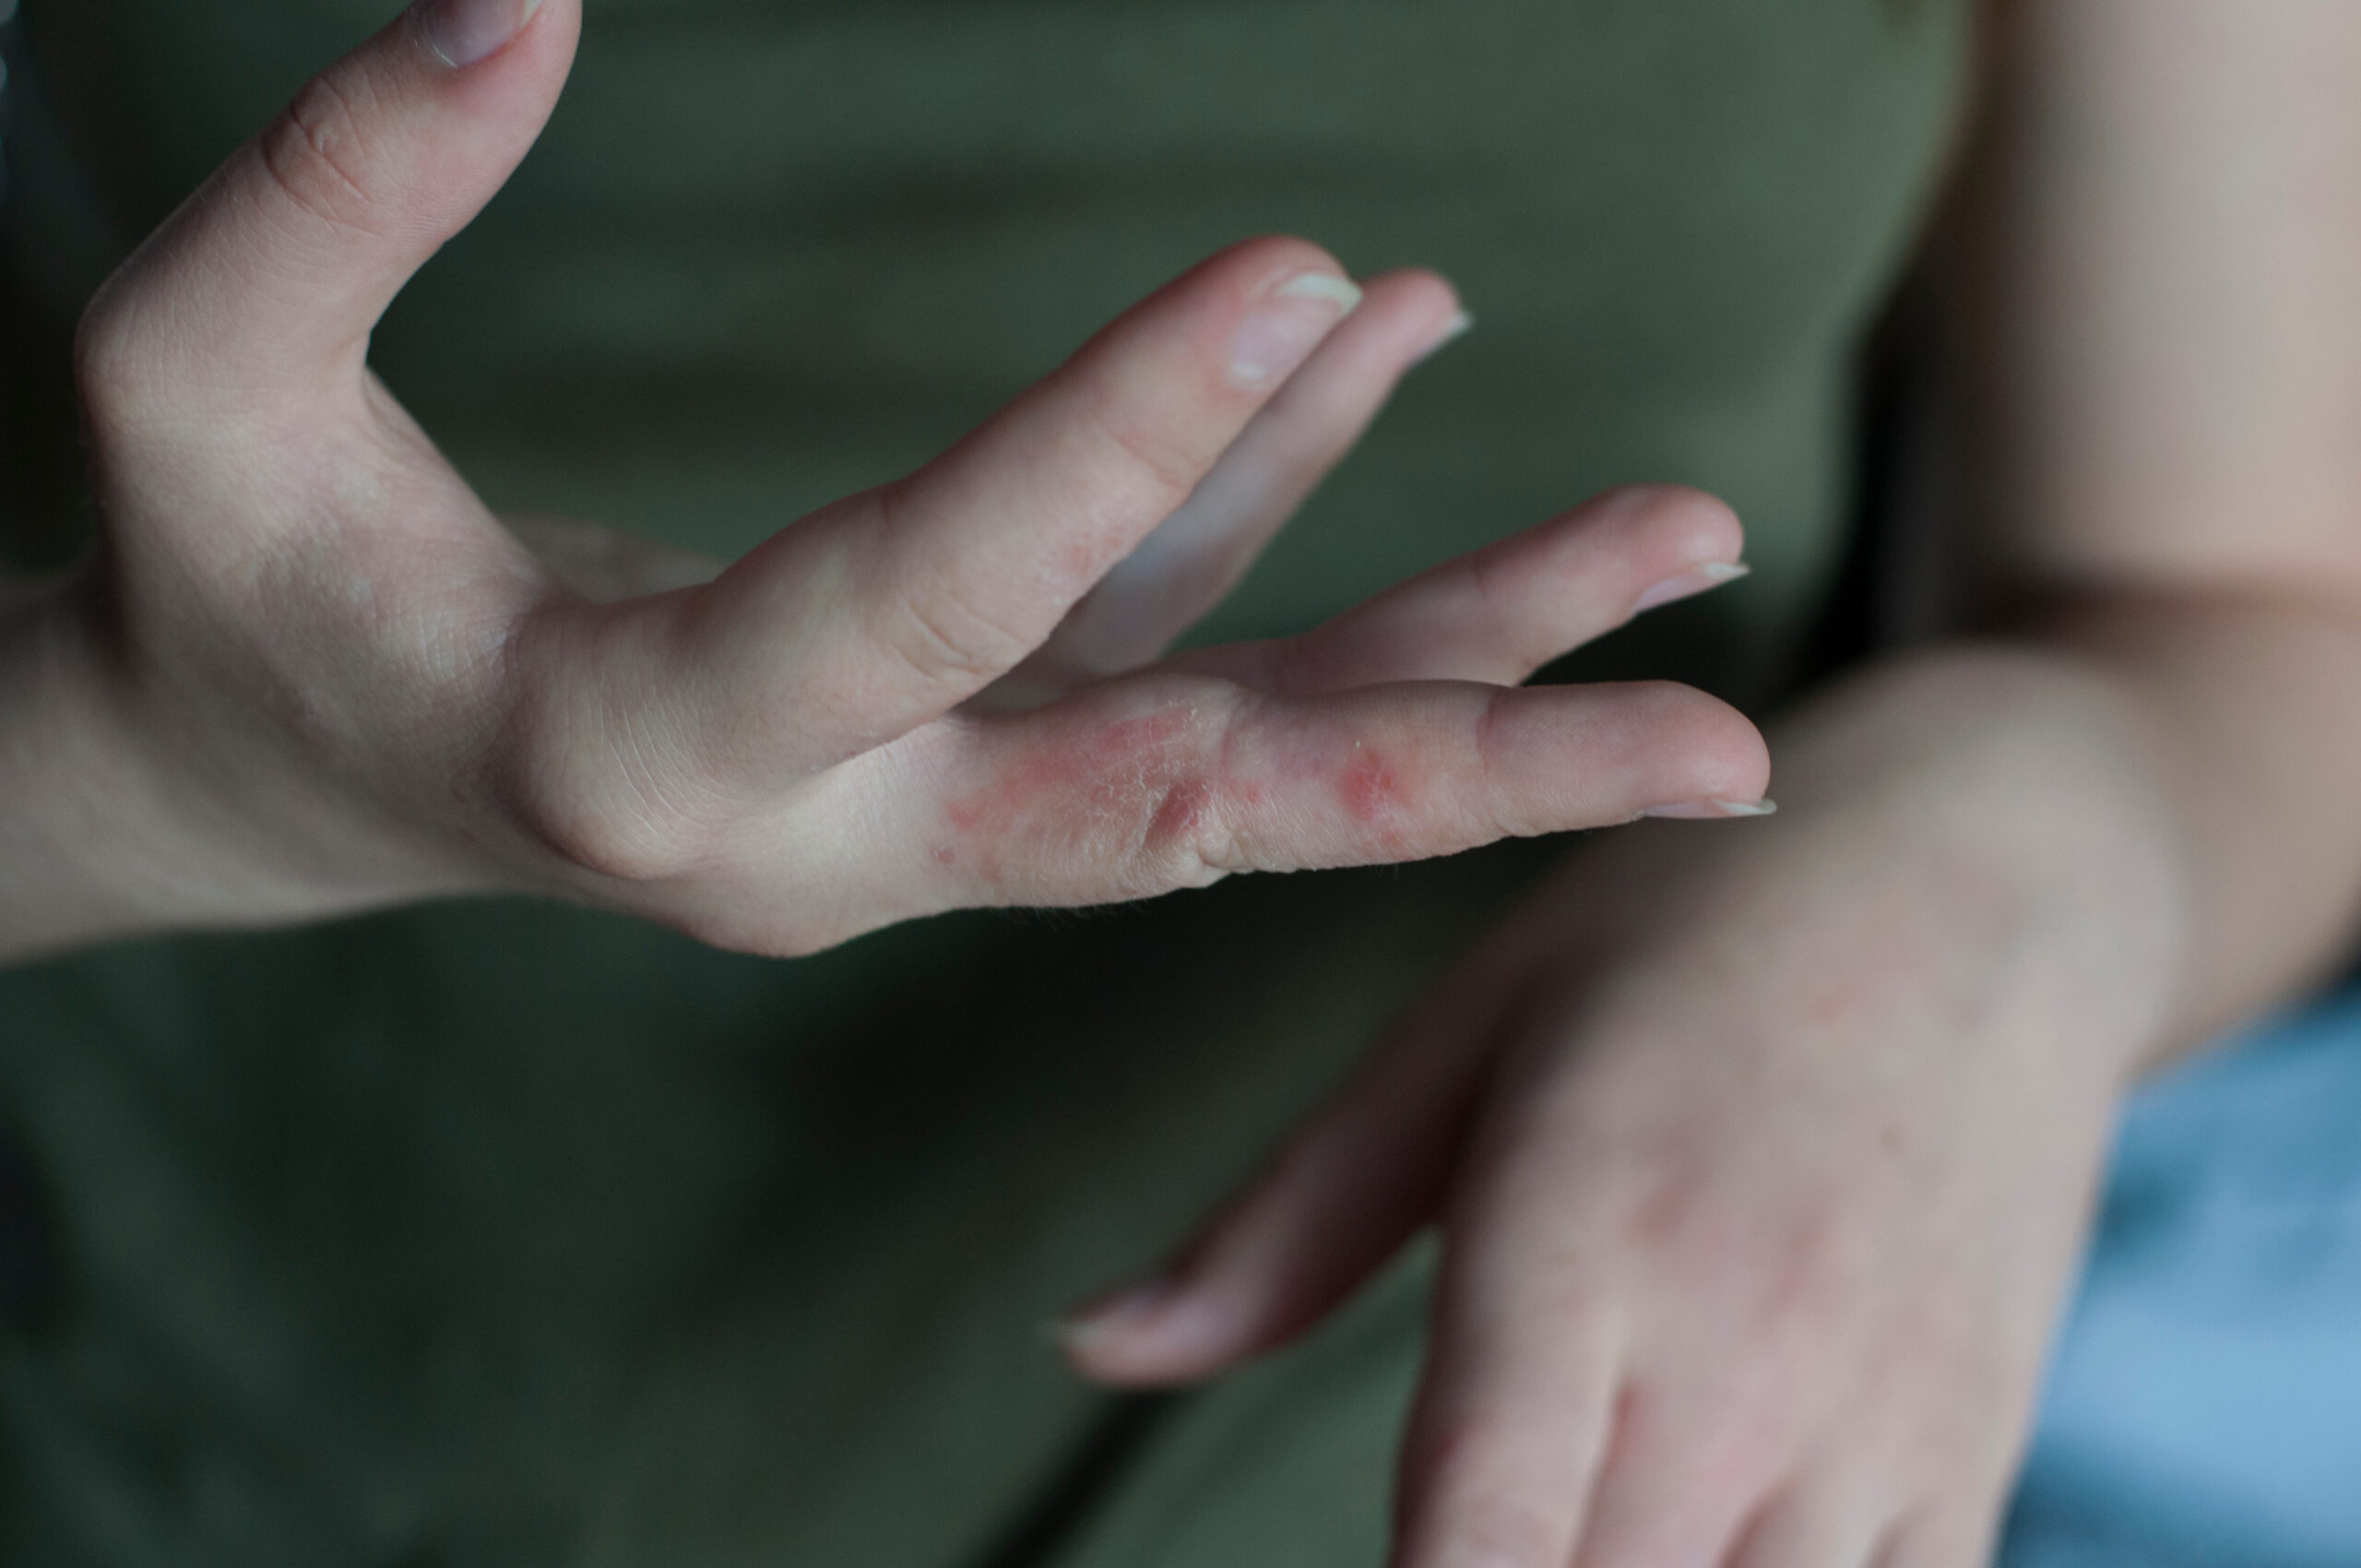 Scabies: What is, Symptoms, Treatment, Prevention, and Useful Facts